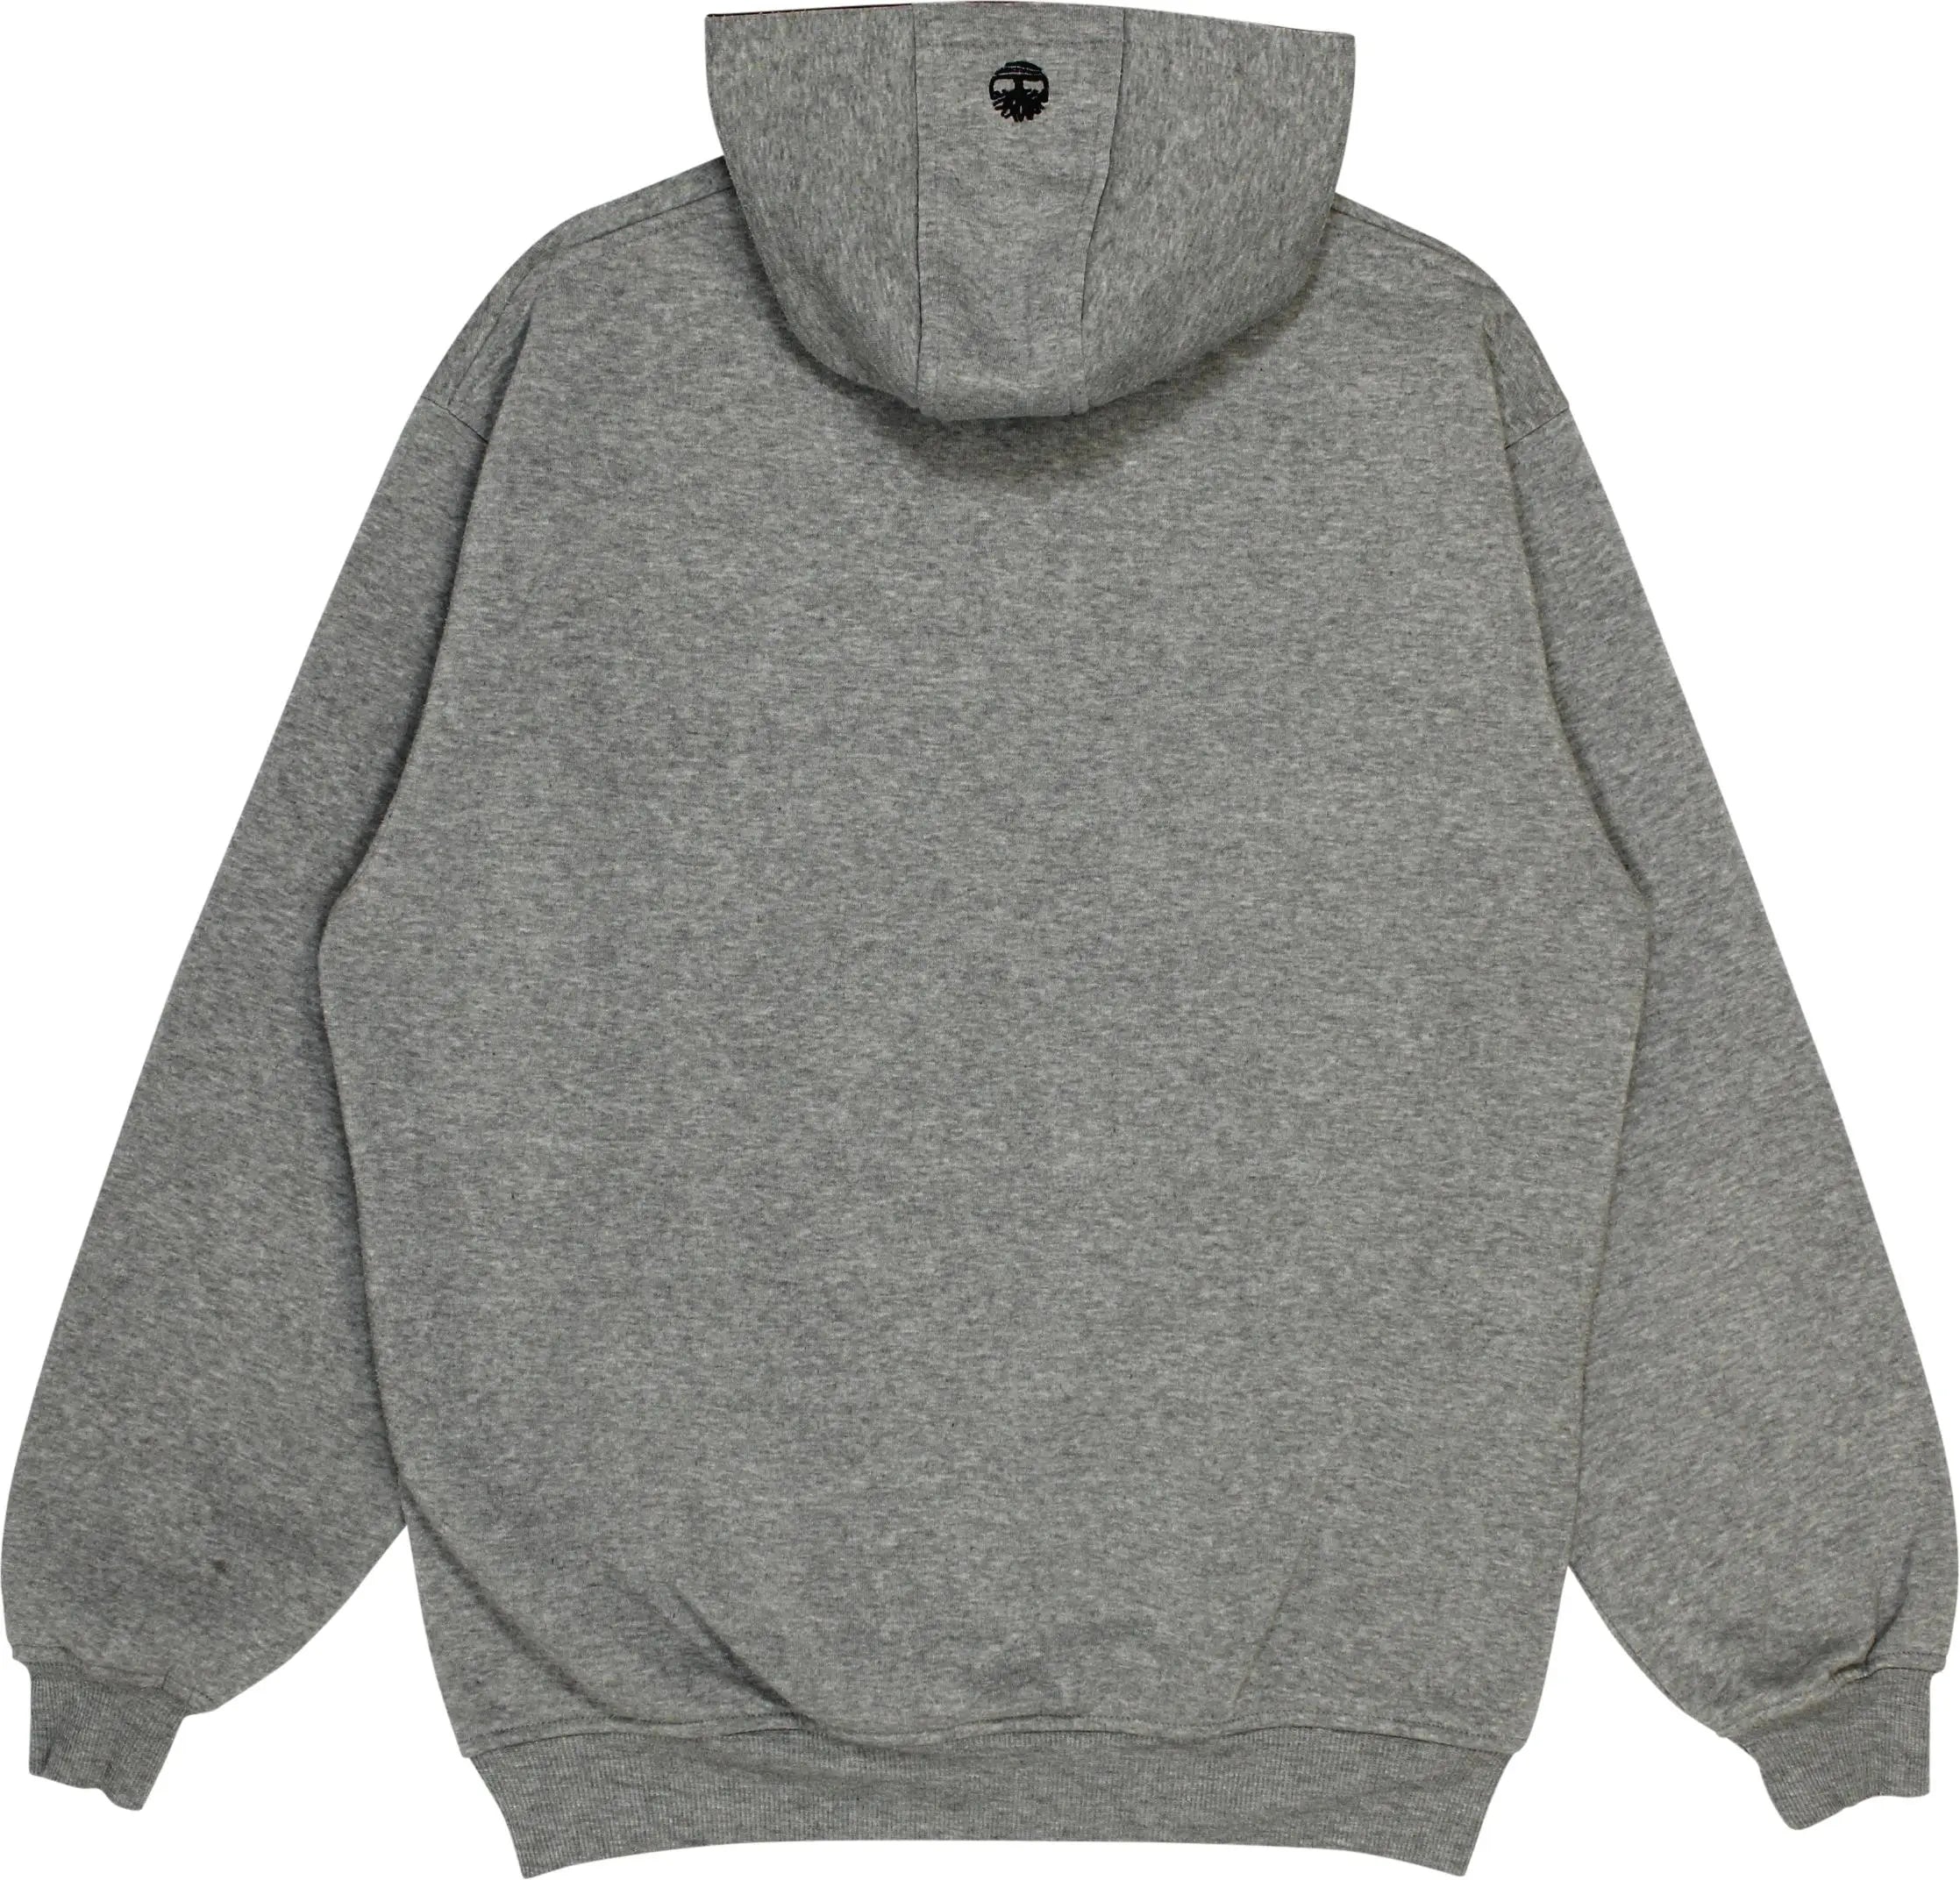 Timberland - Grey Hoodie by Timberland- ThriftTale.com - Vintage and second handclothing